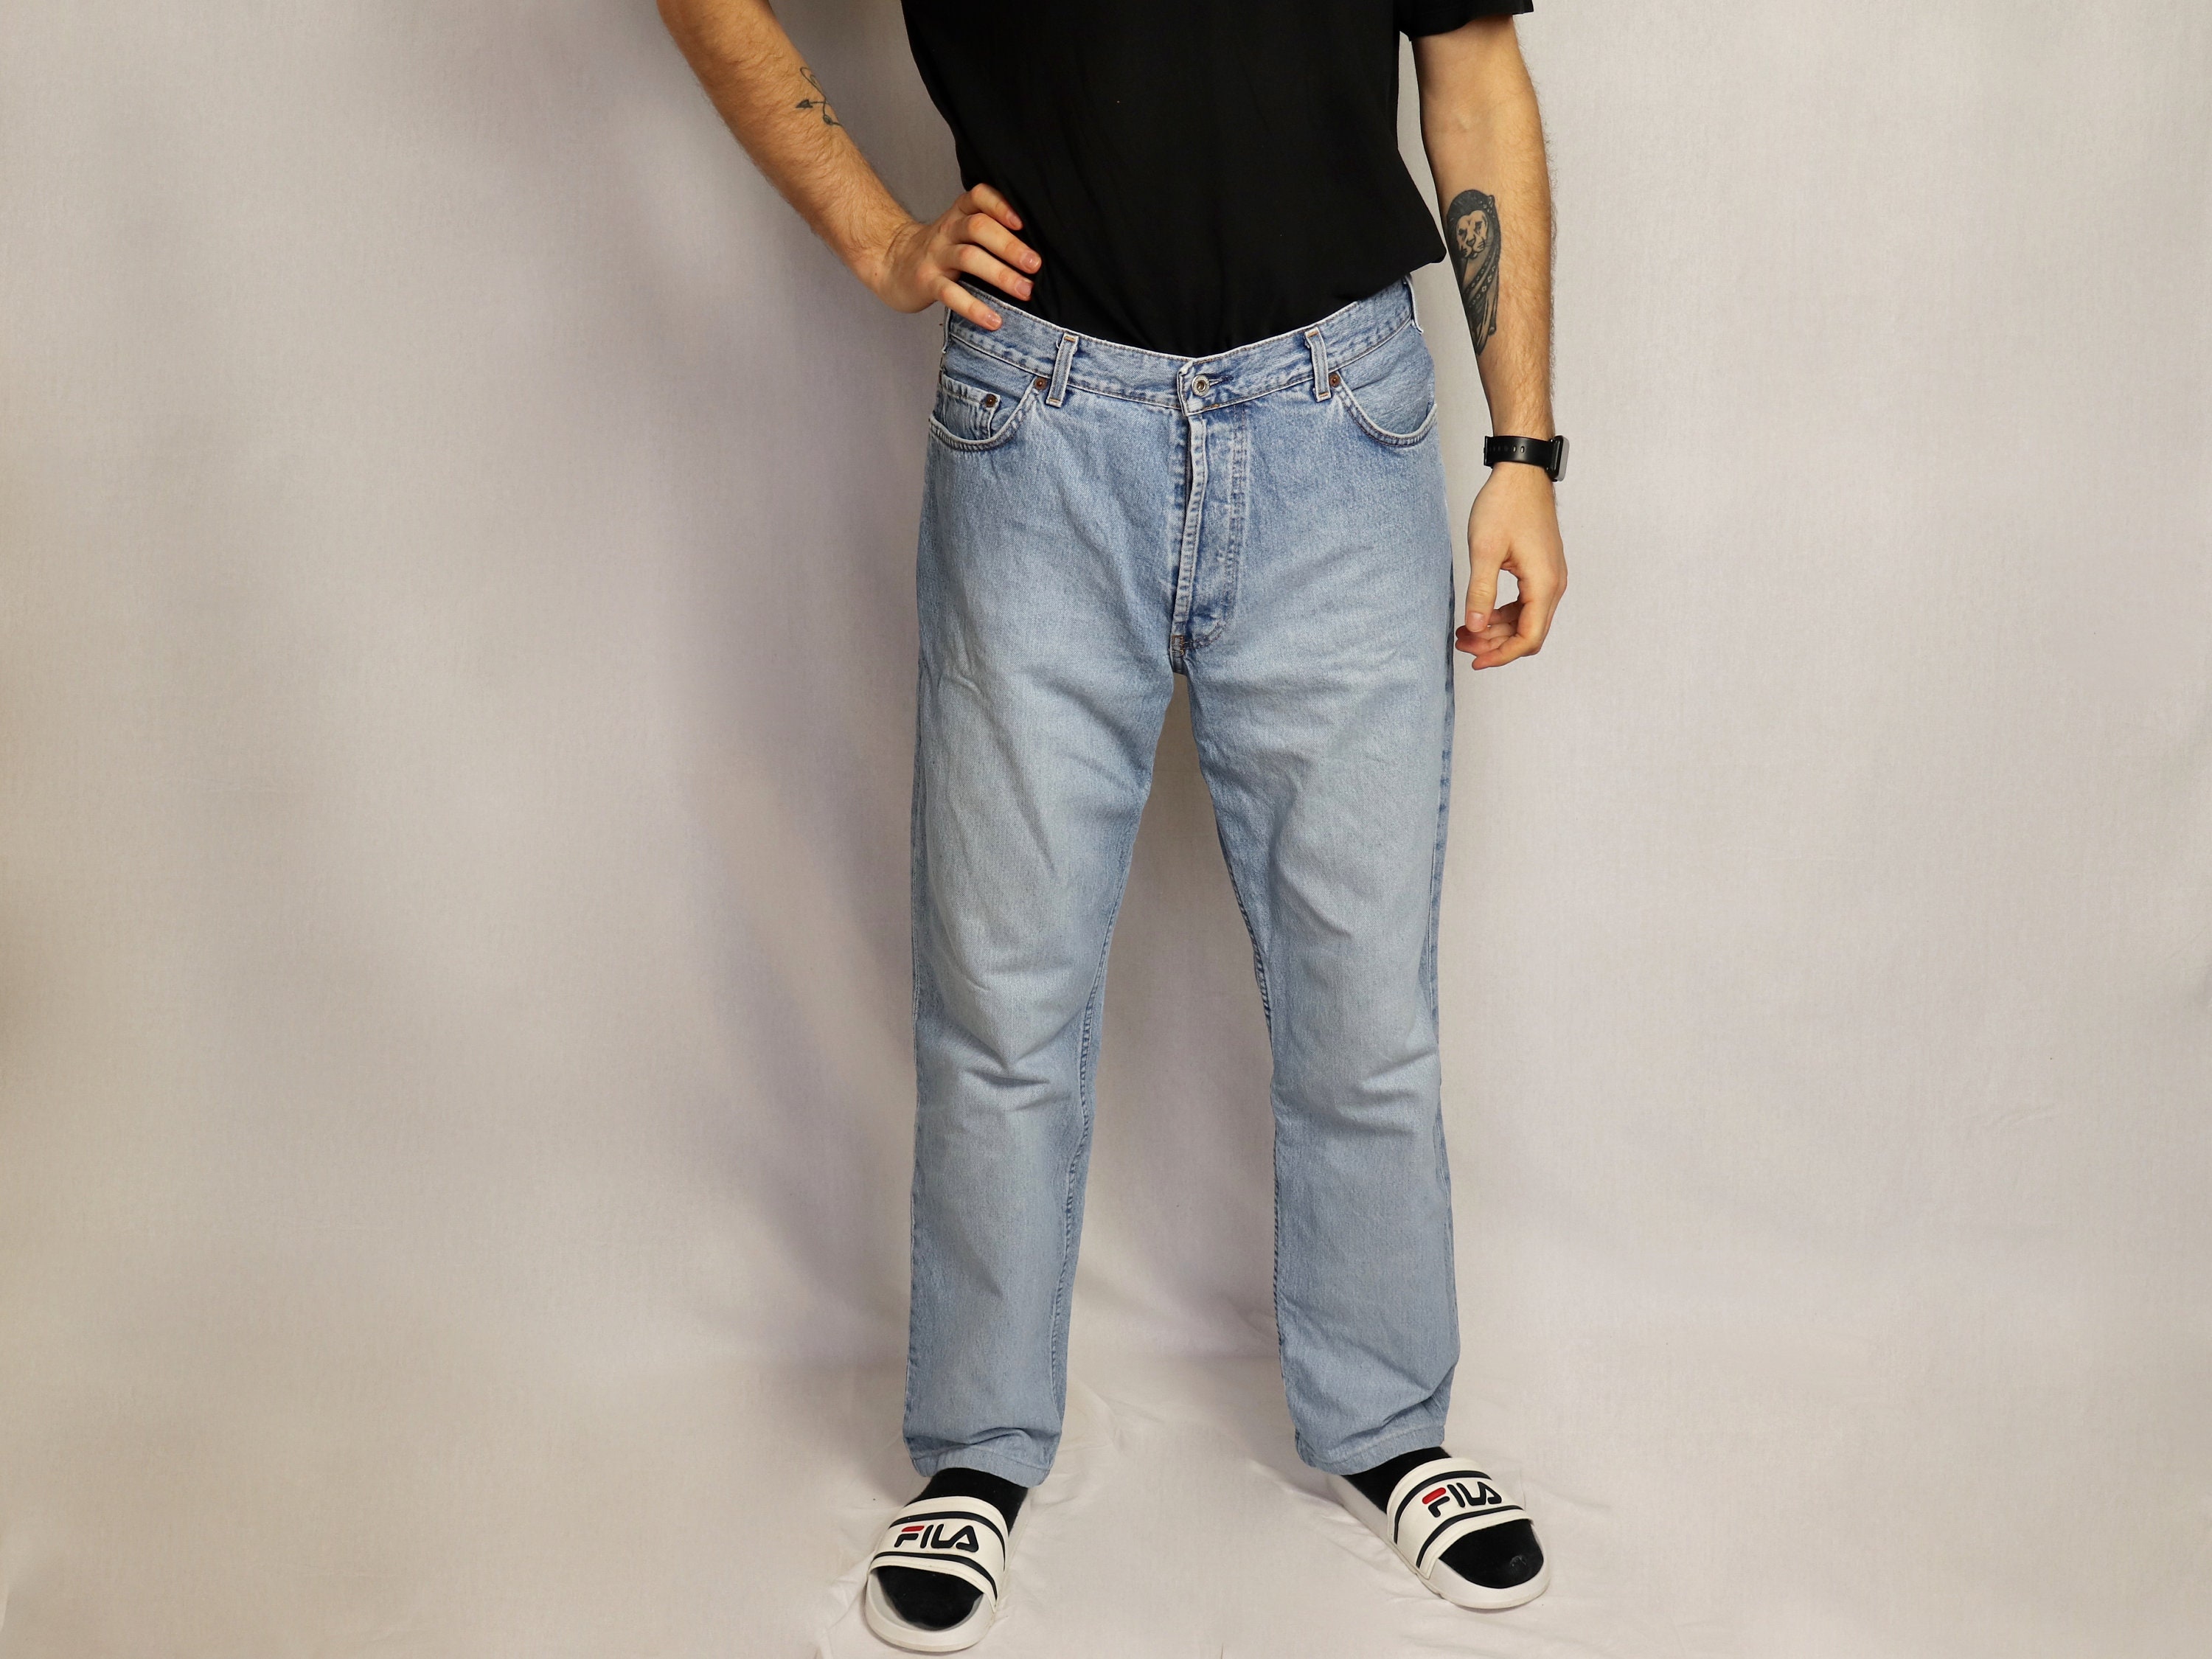 Vintage 90s Mustang Blue Straight Jeans / Sports Fashion - Etsy Finland